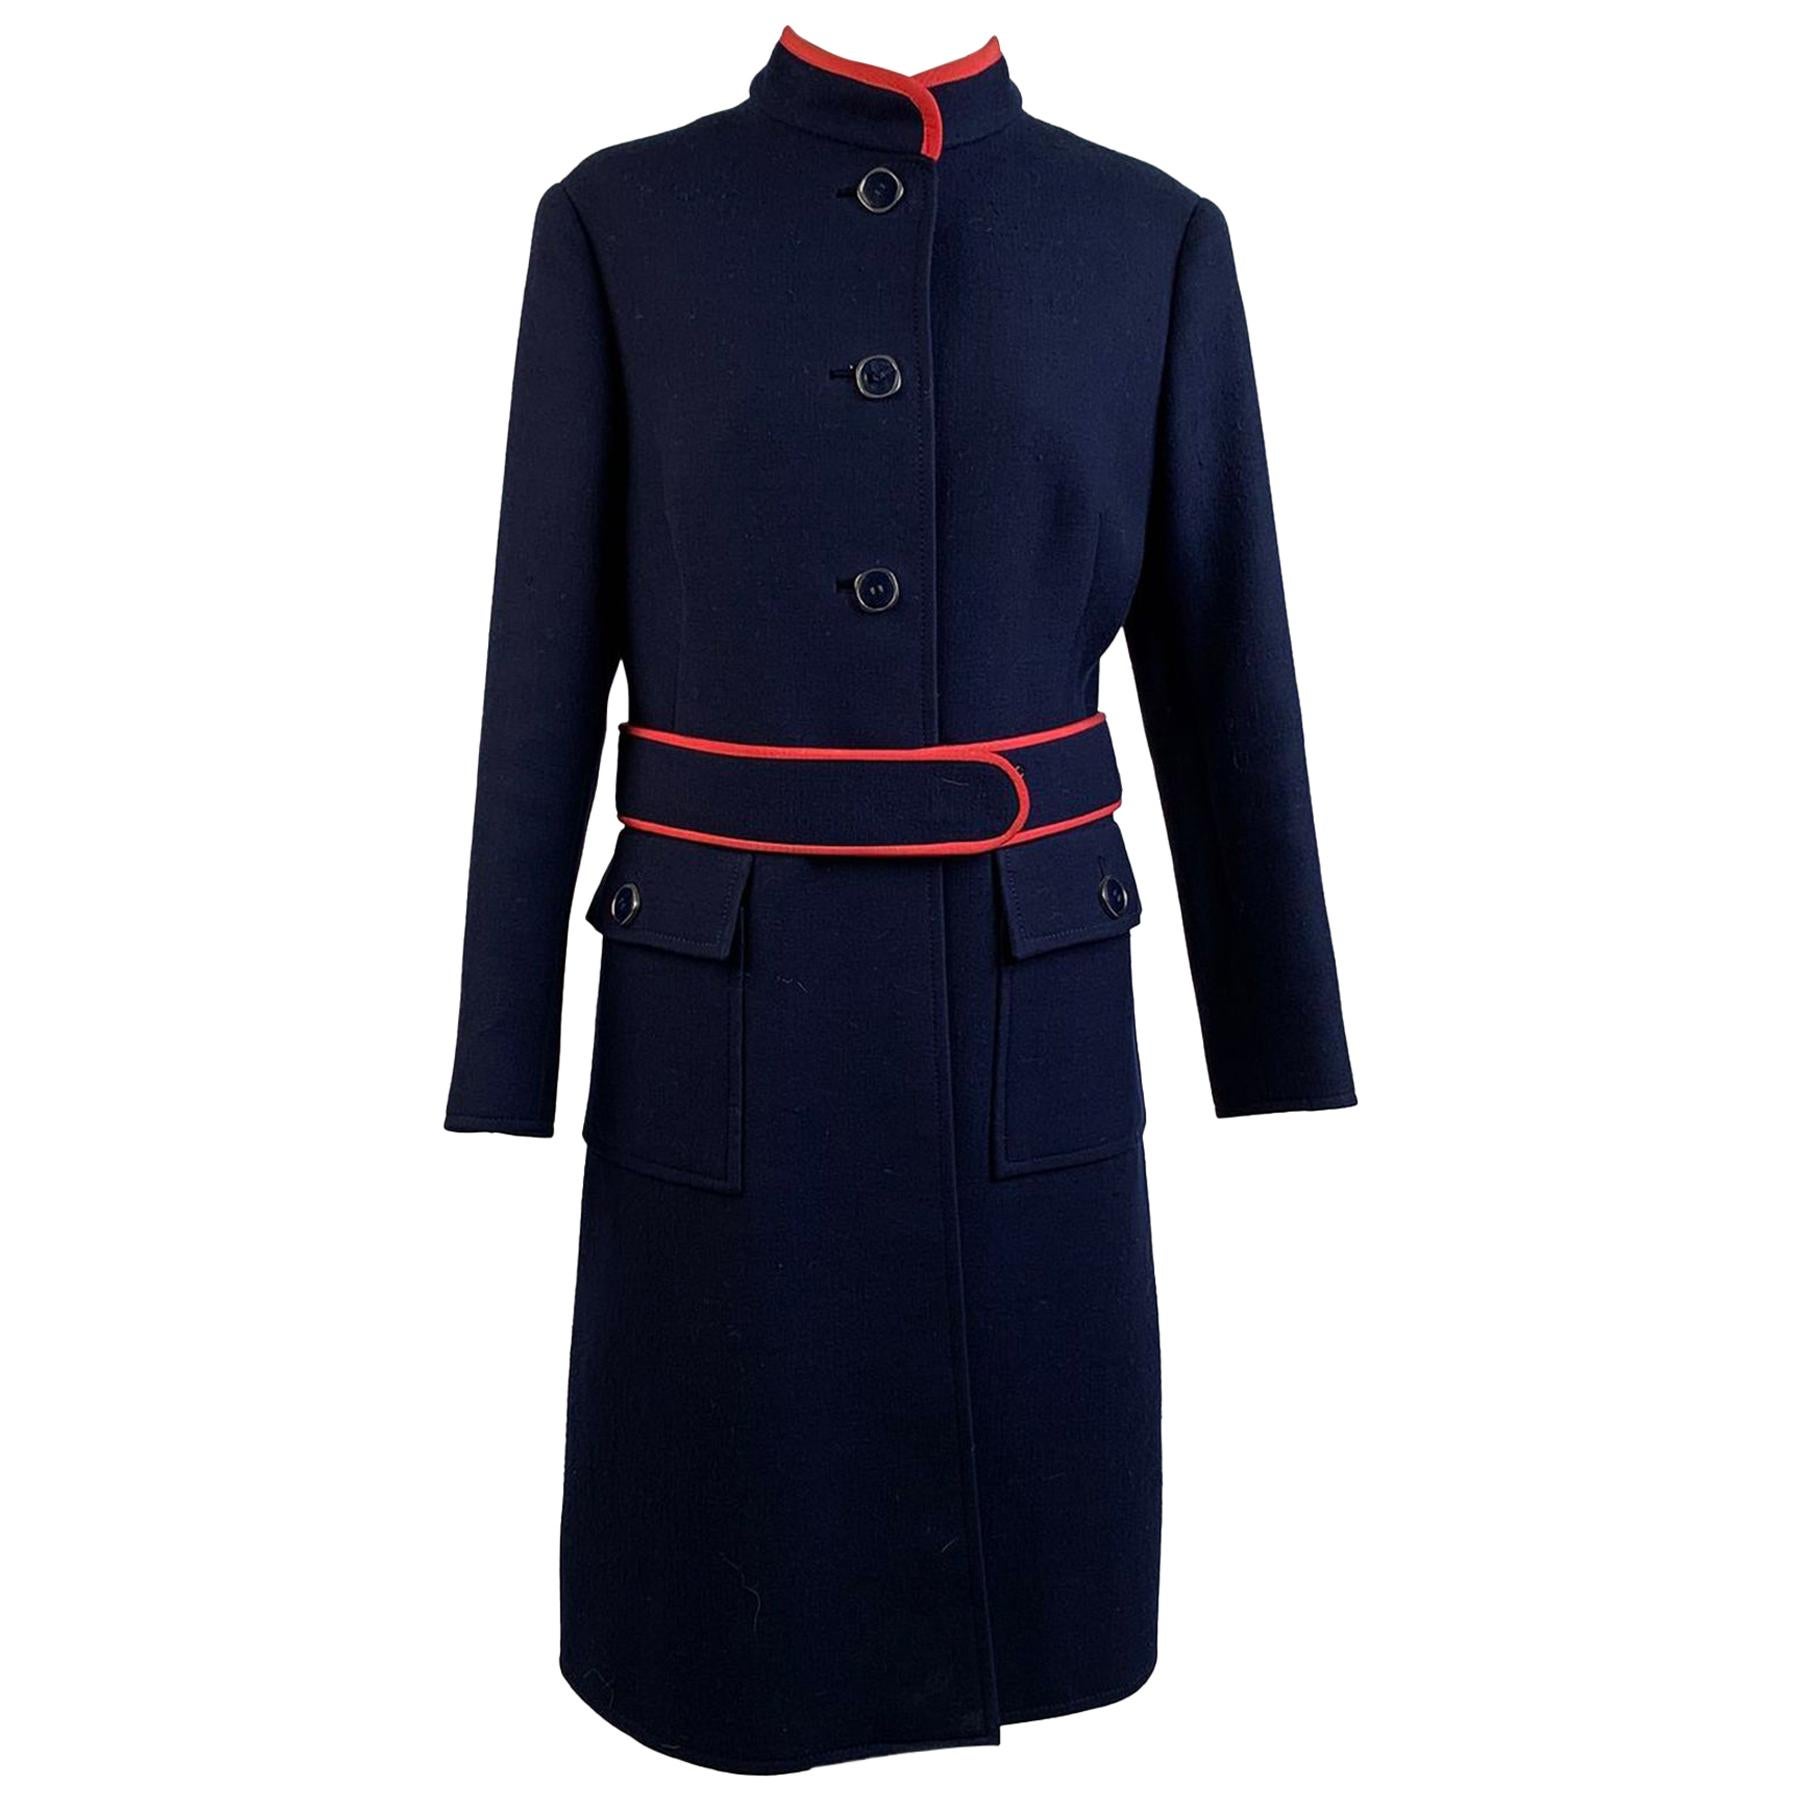 Vintage Navy Blue Wool Belted Coat with Contrast Trim